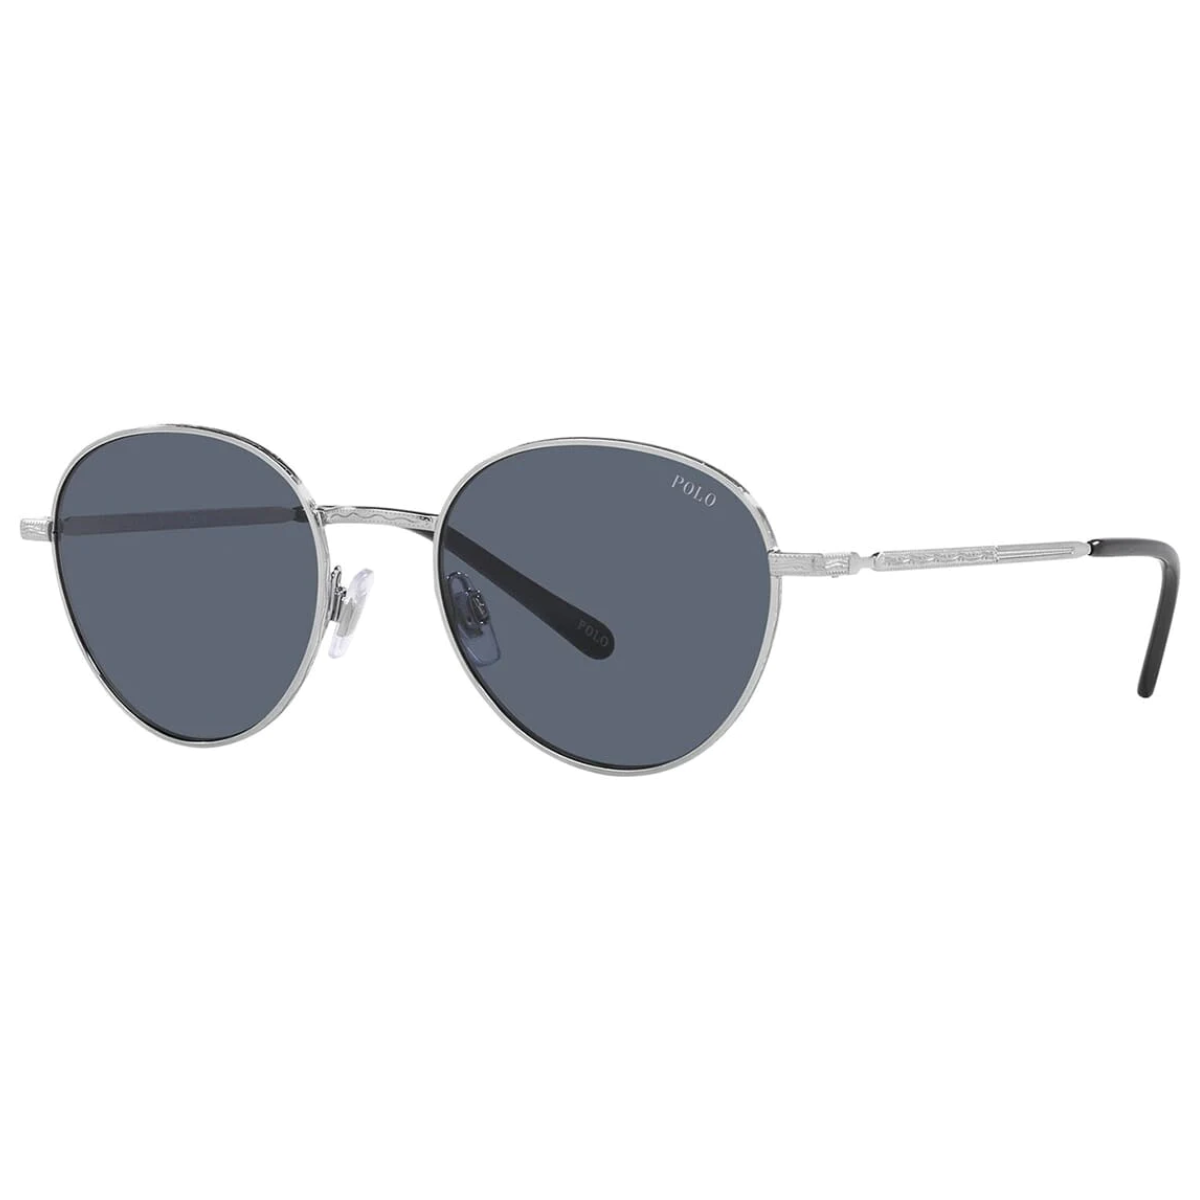 ""Upgrade your look with Ralph Lauren Polo 3144 sunglasses for men at Optorium. Top brands, square/round shapes, metal frames, dark blue lenses. Stay stylish!"